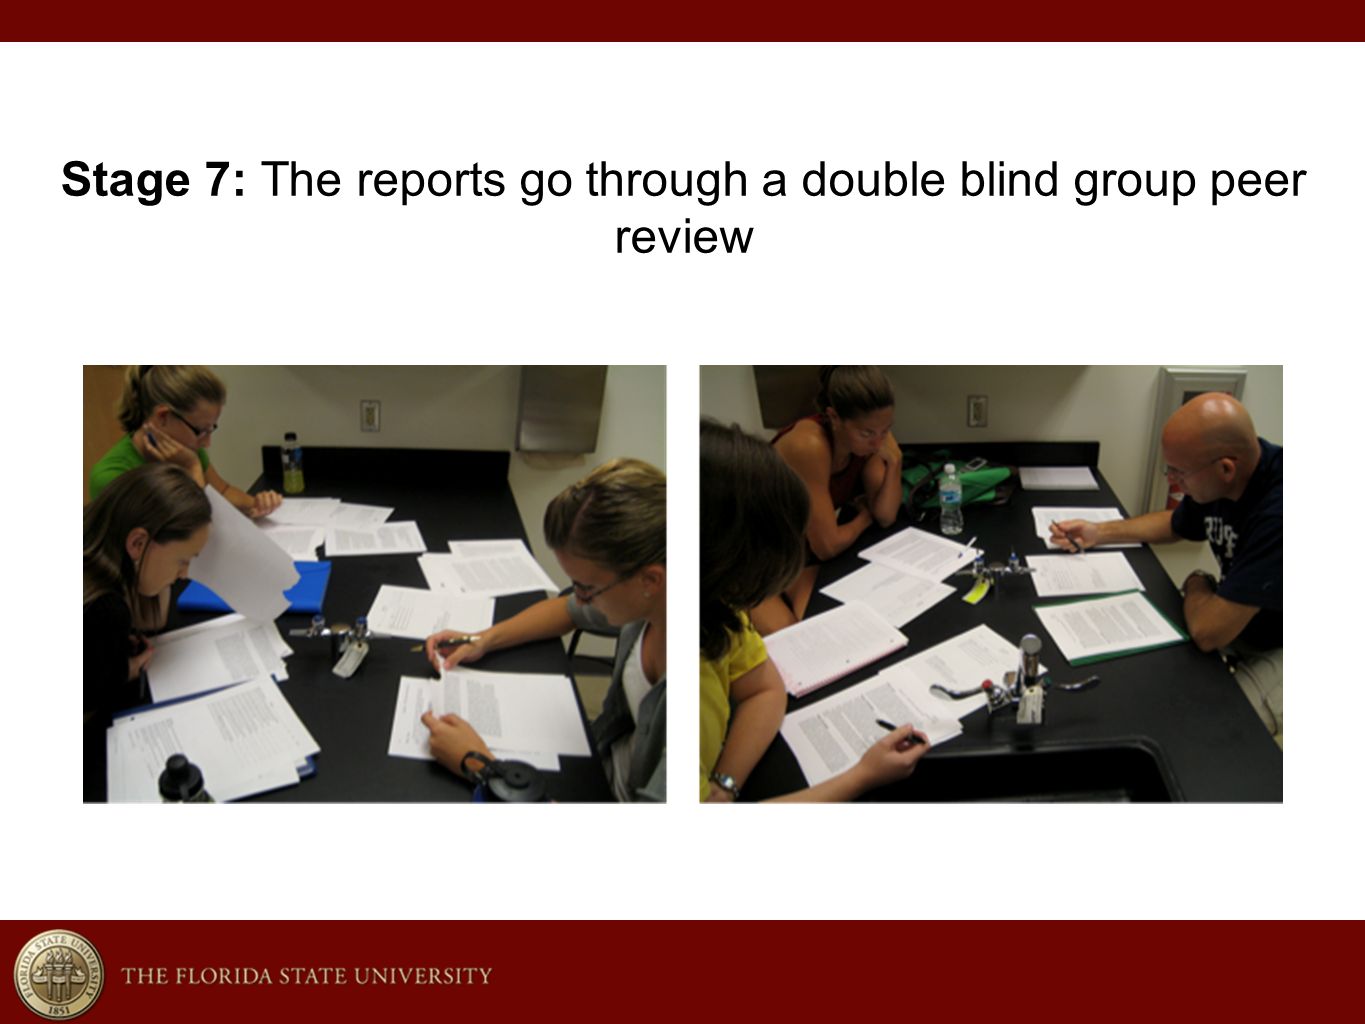 Stage 7: The reports go through a double blind group peer review